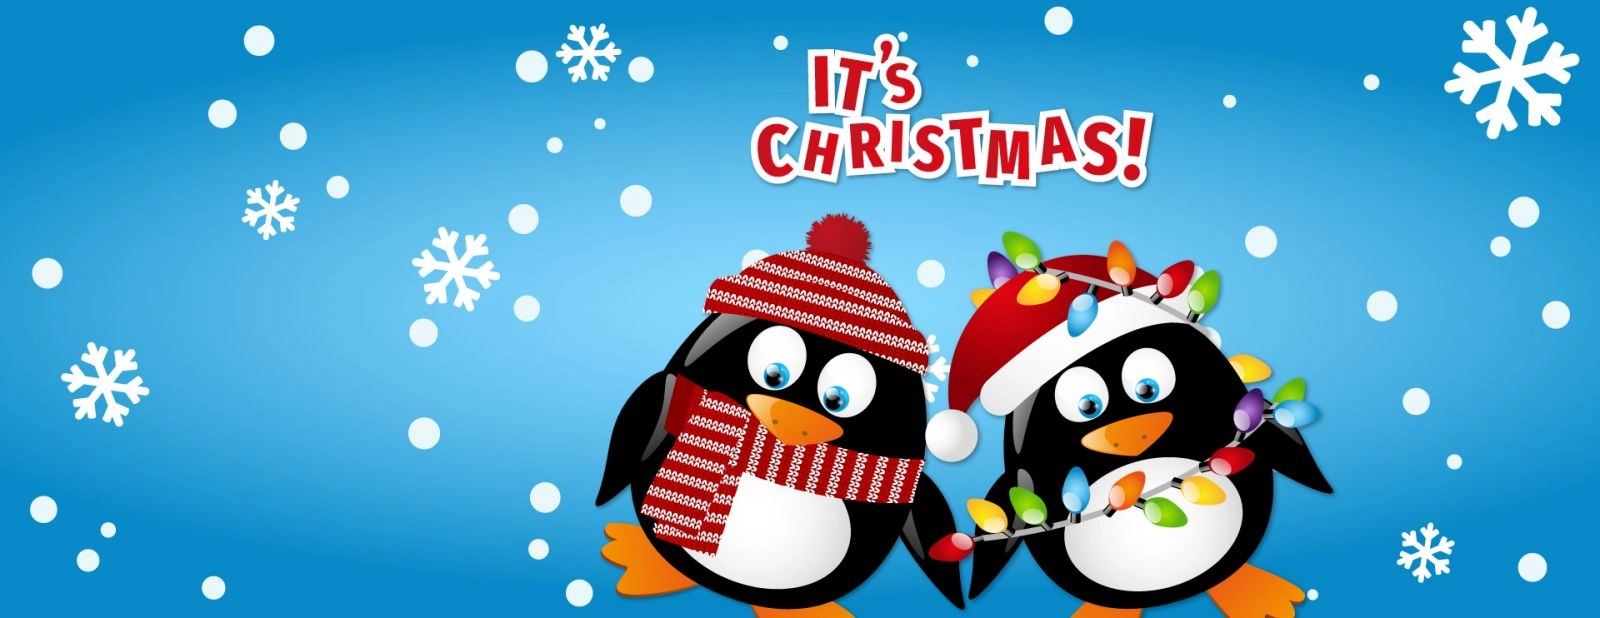 KOOSA Kids Christmas Holiday Clubs, High Quality Childcare & Festive Fun for 4-13 year-olds